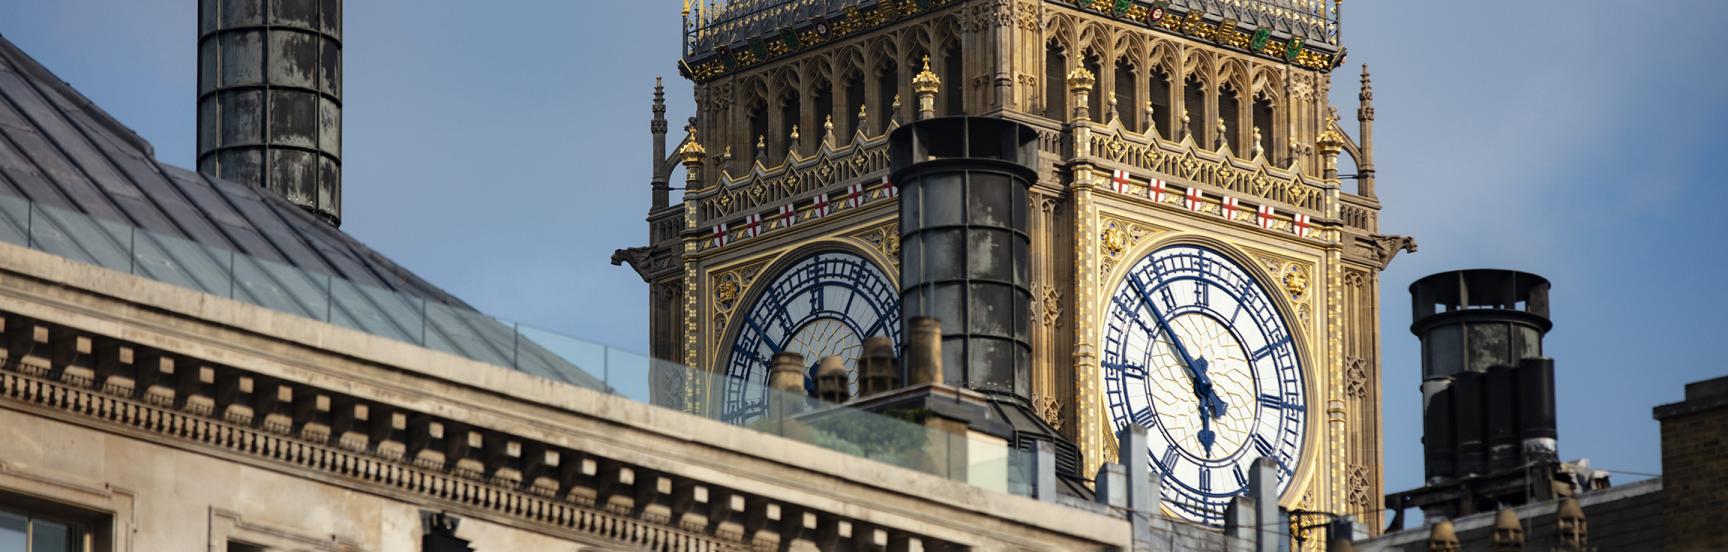 View of the Big Ben clock behind a building roof